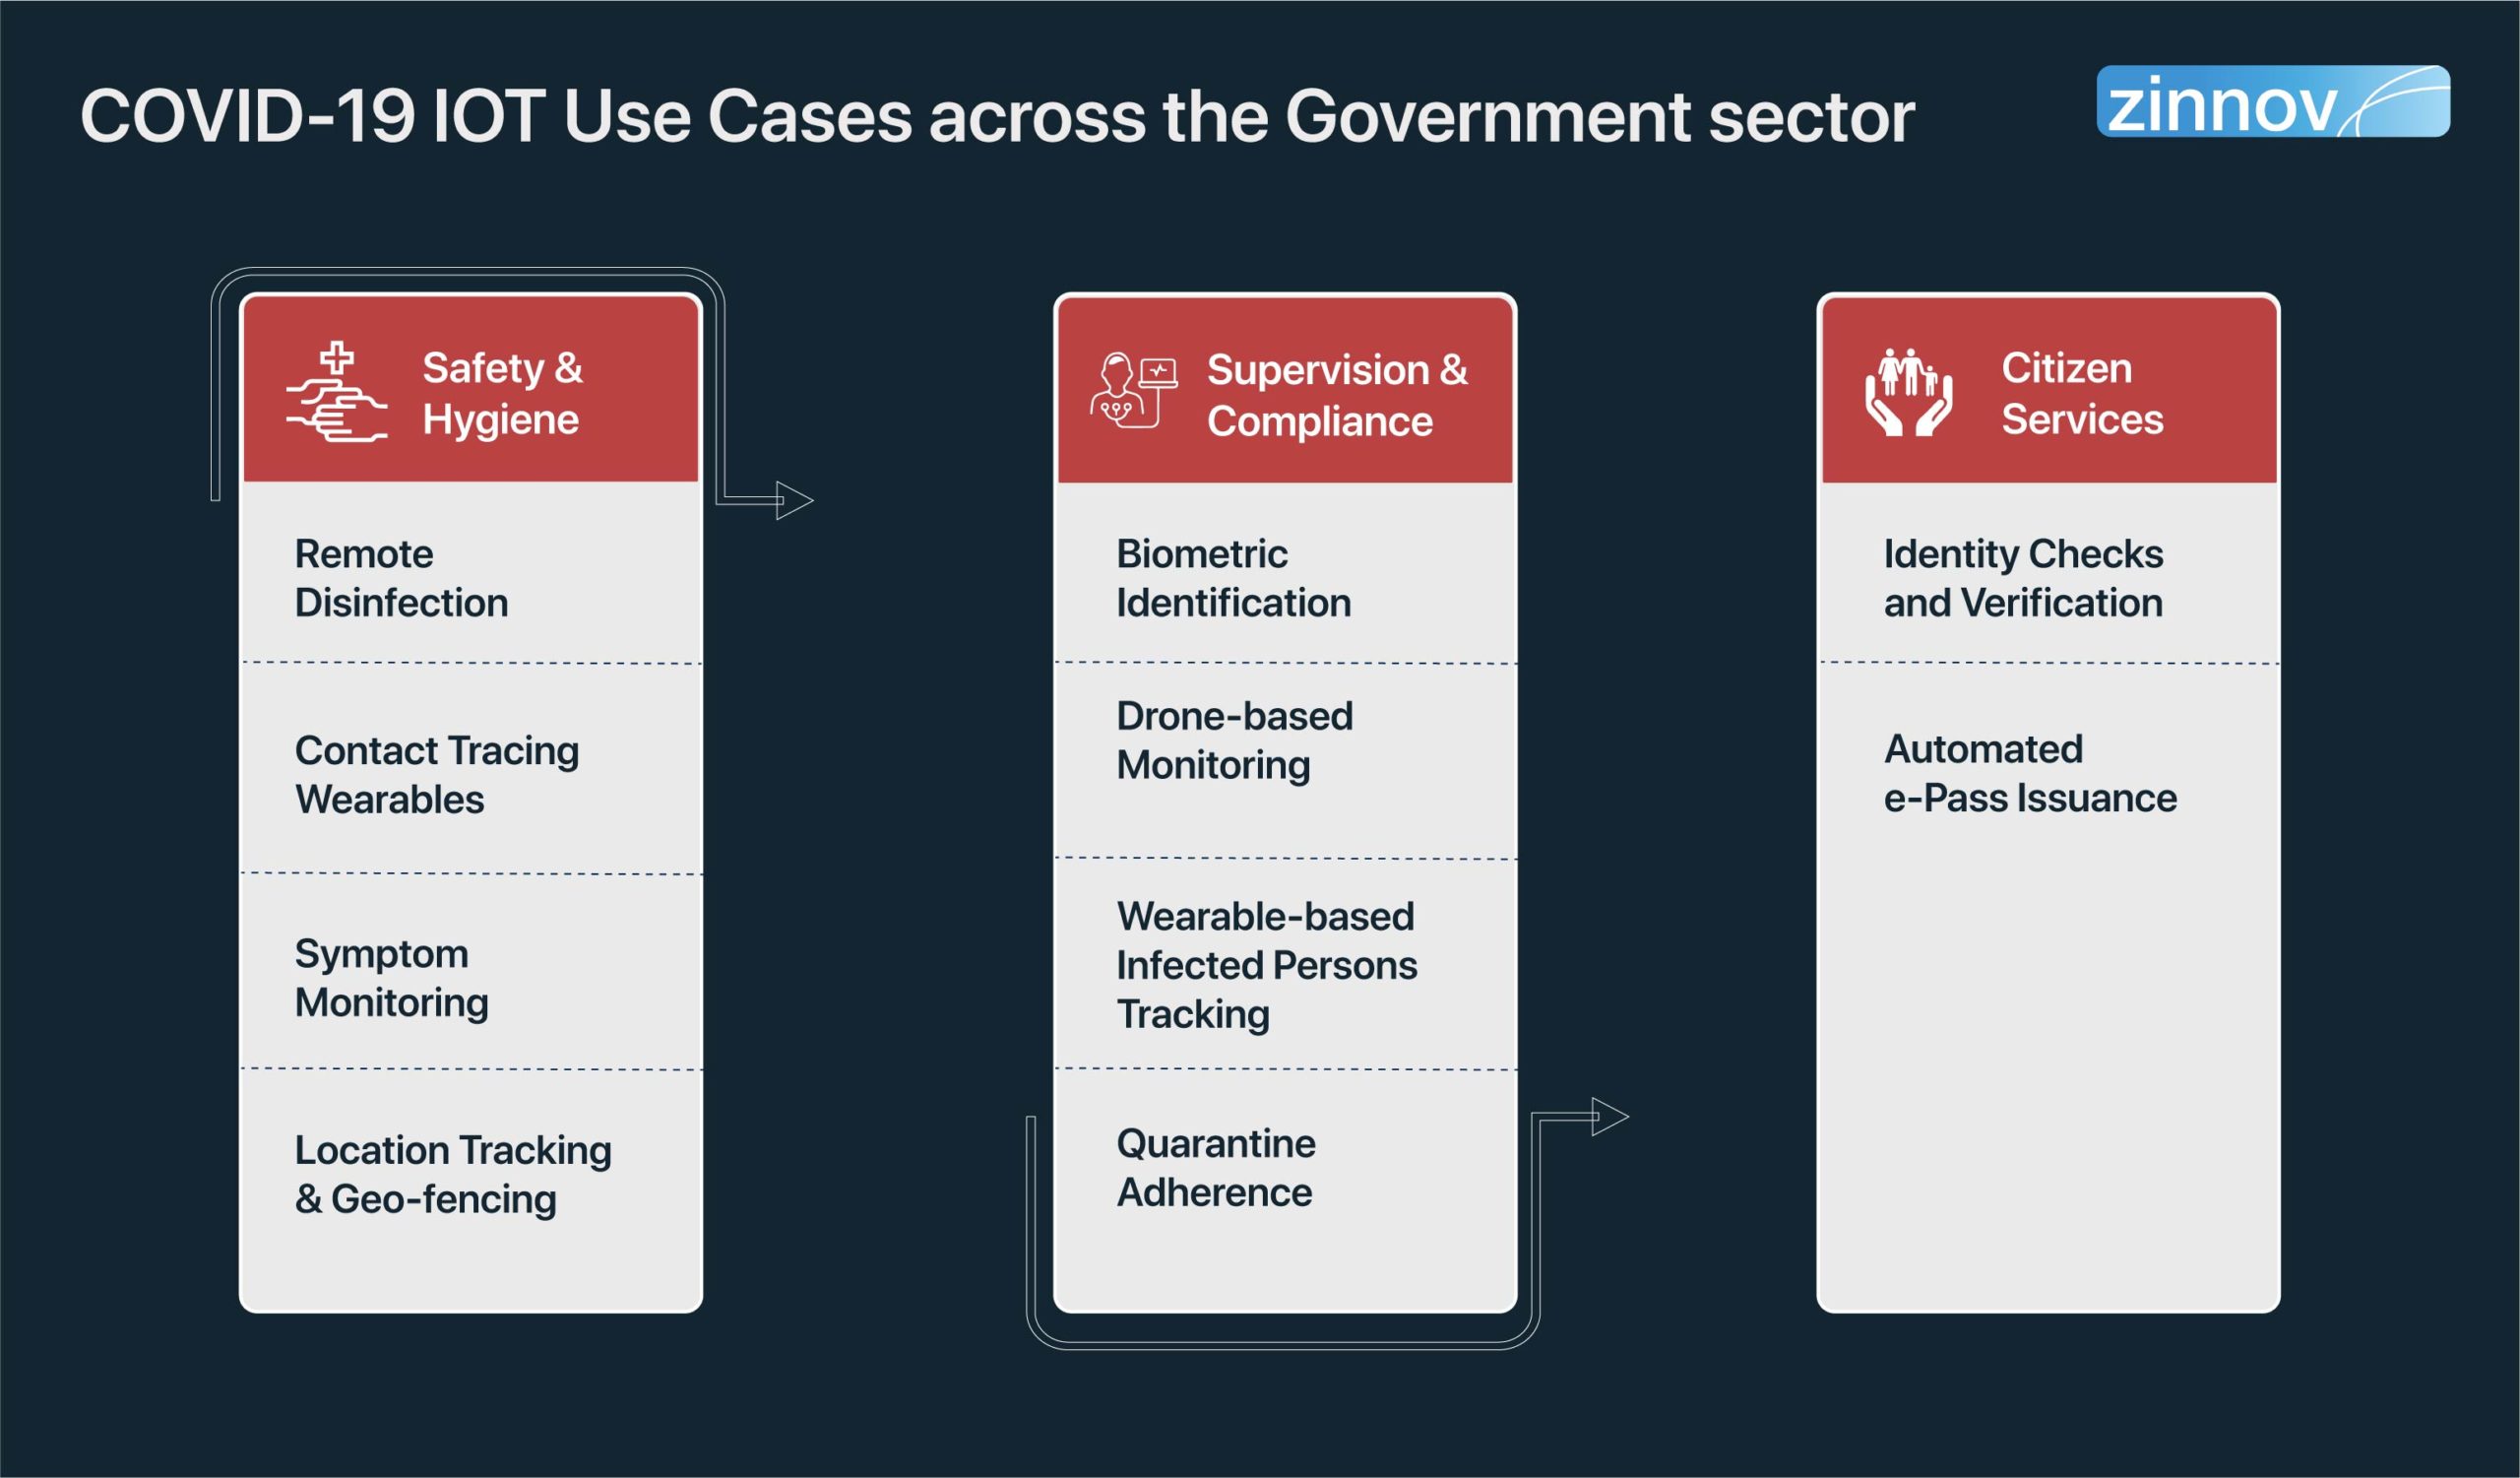 COVID-19 IOT use cases the govt. sector